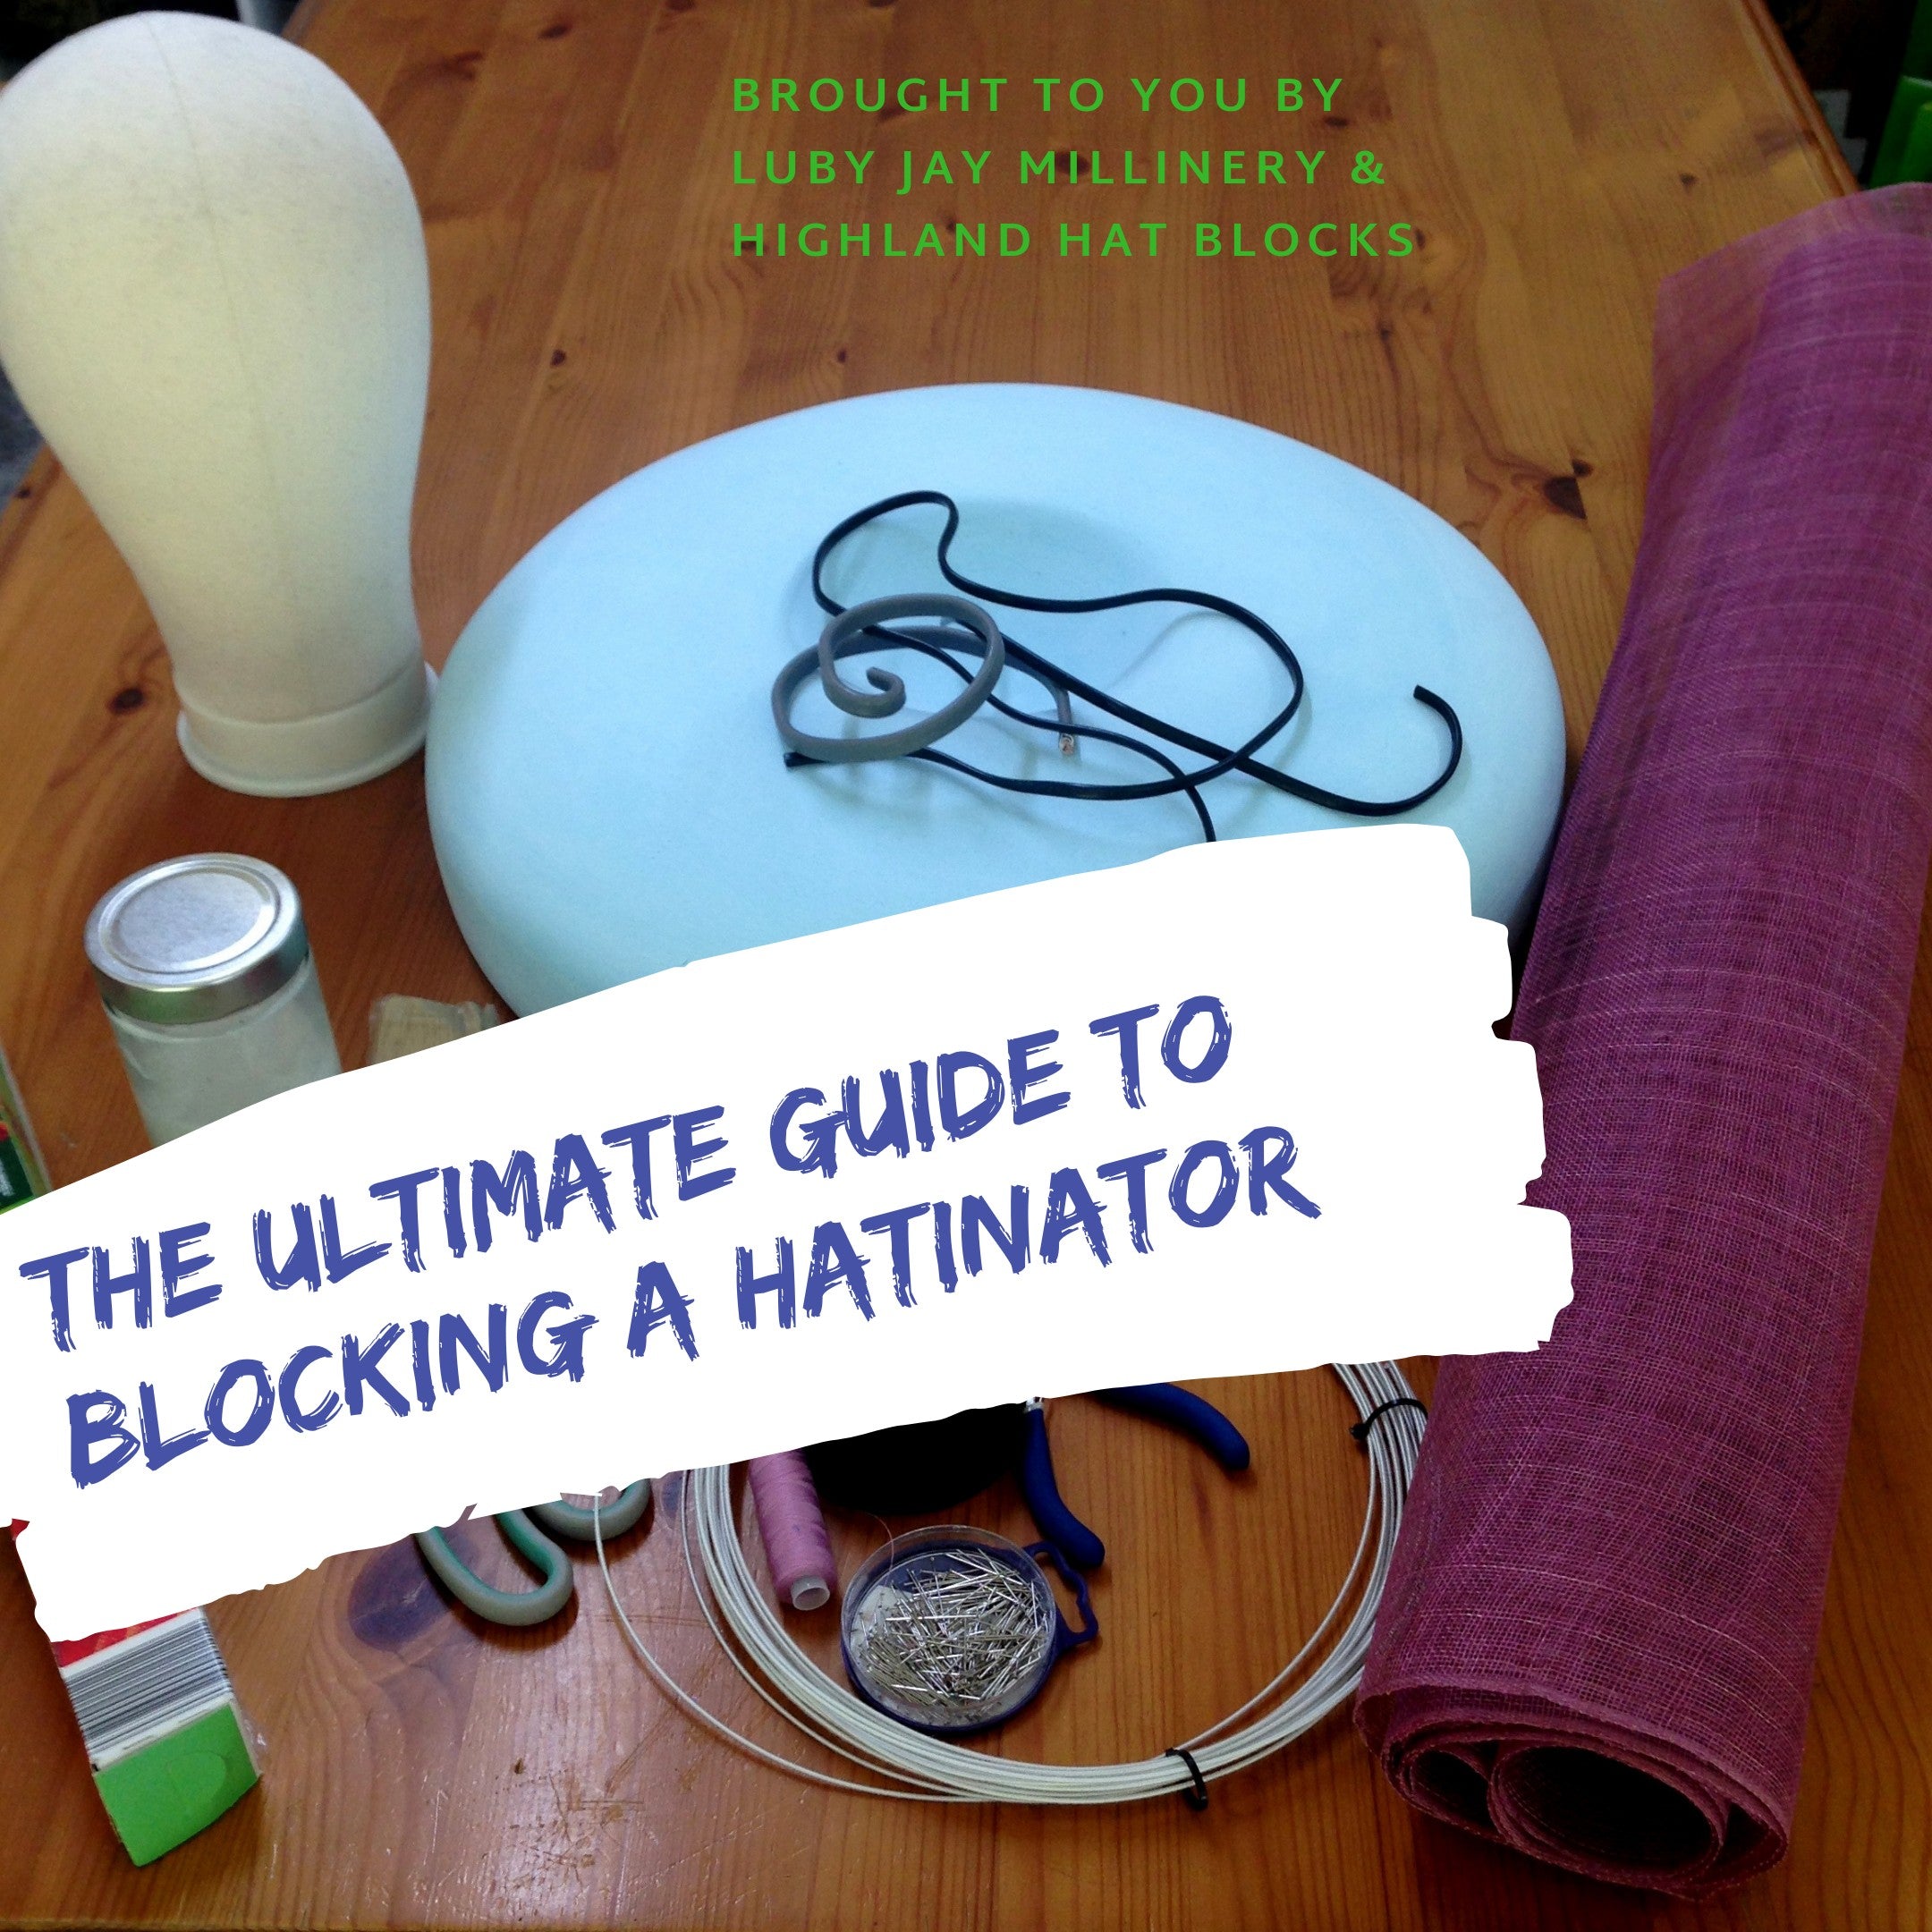 How to make a hatinator. learning about sinamay. millinery courses learn millinery online